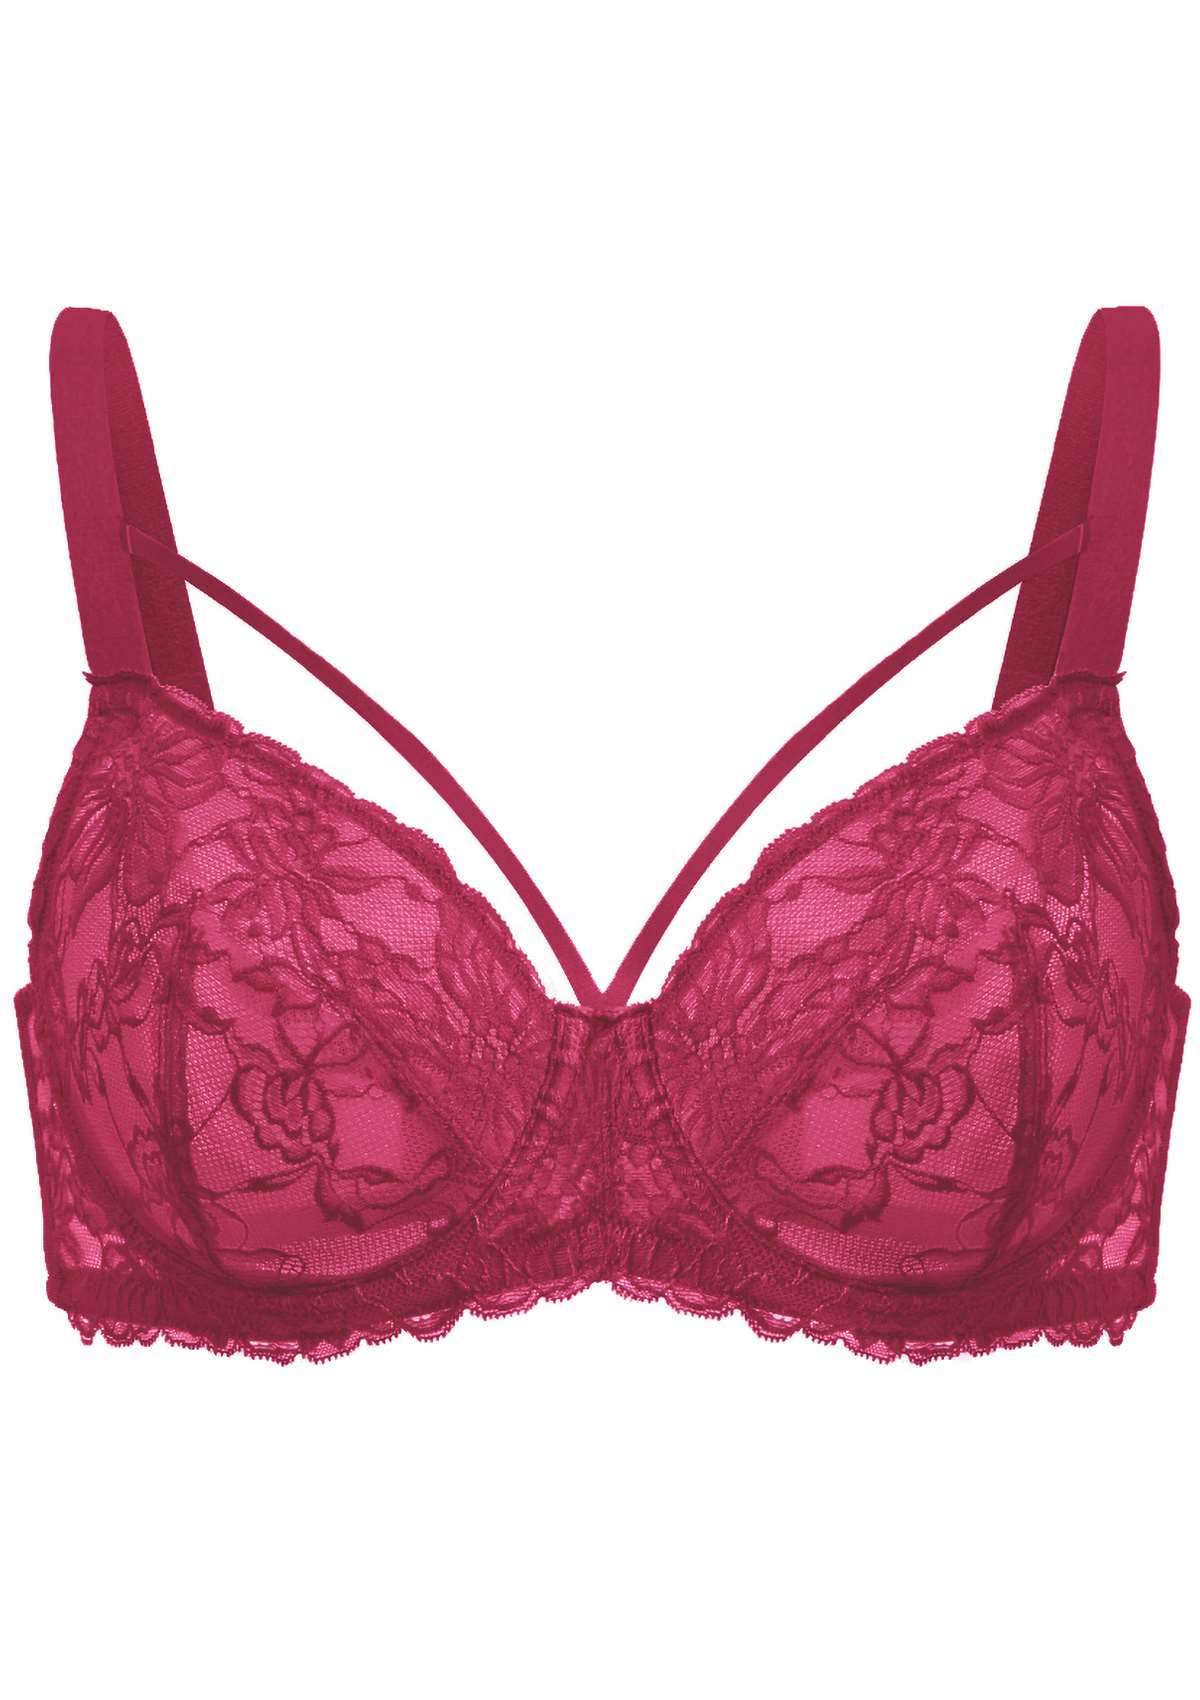 HSIA Pretty In Petals Sexy Lace Bra: Full Coverage Back Smoothing Bra - Red / 36 / H